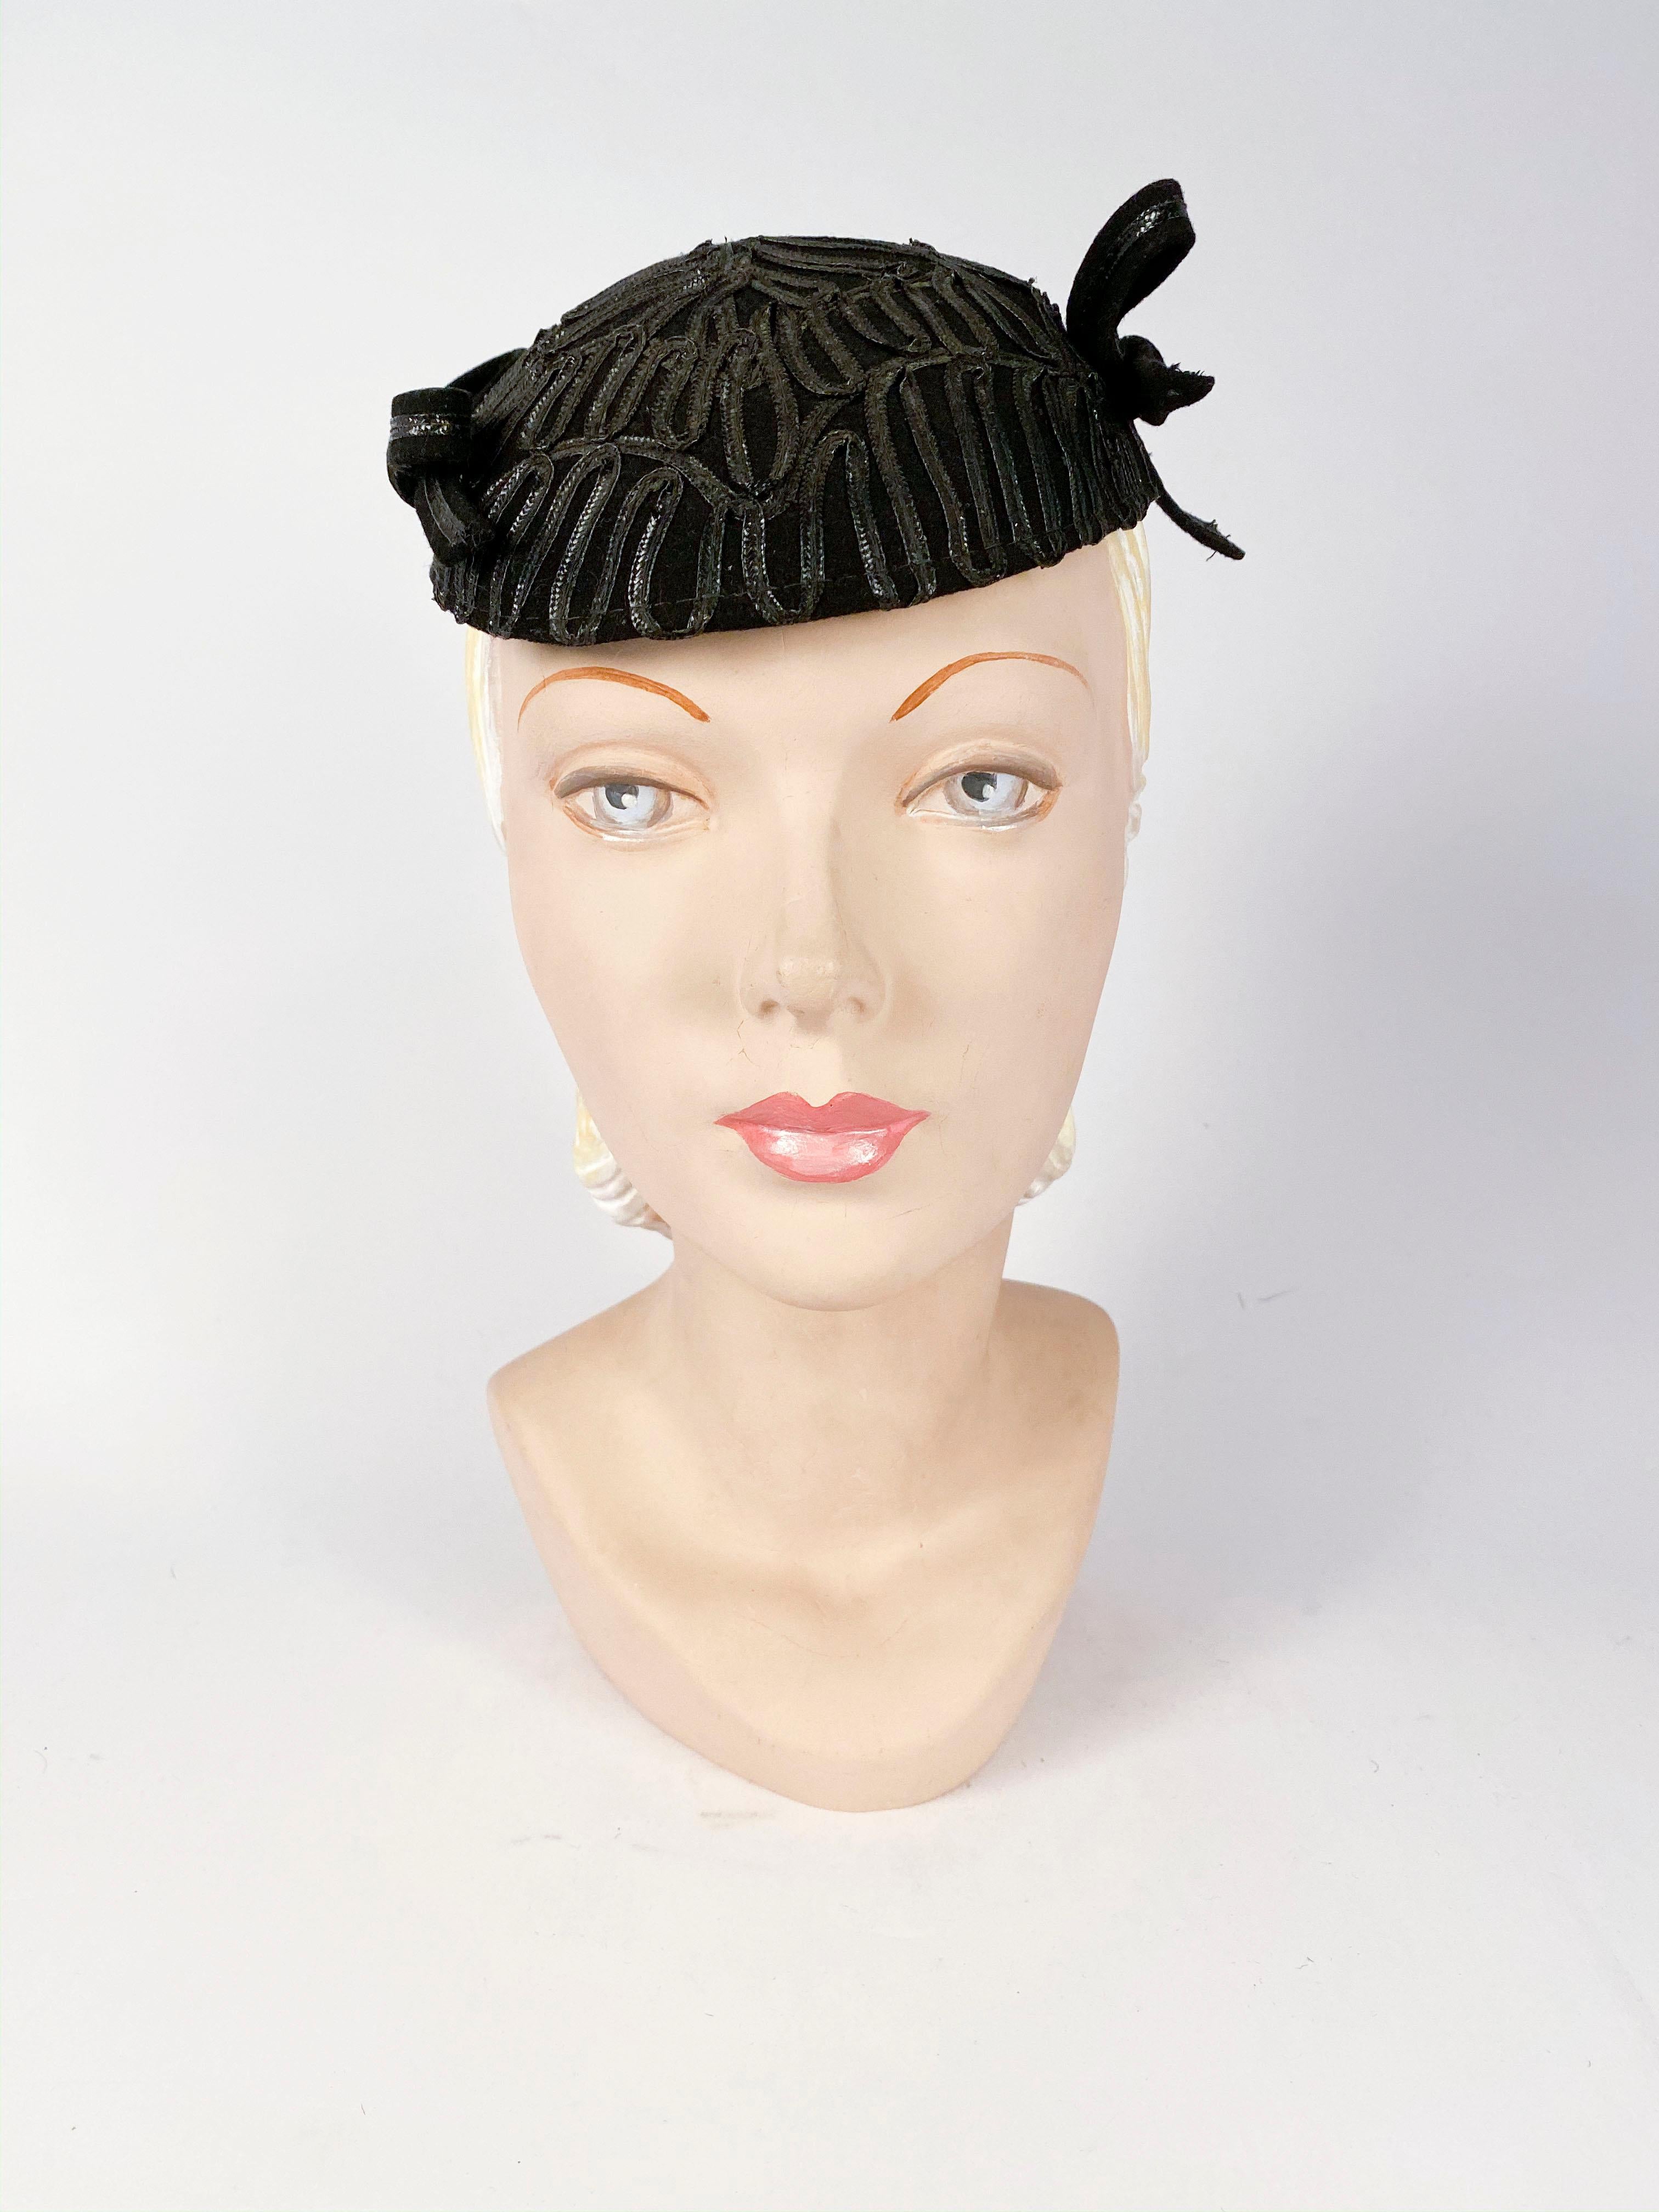 1930s black fur felt hat with black raffia accents along the entire body of the hat and finished with two raffia/felt bows on the sides.